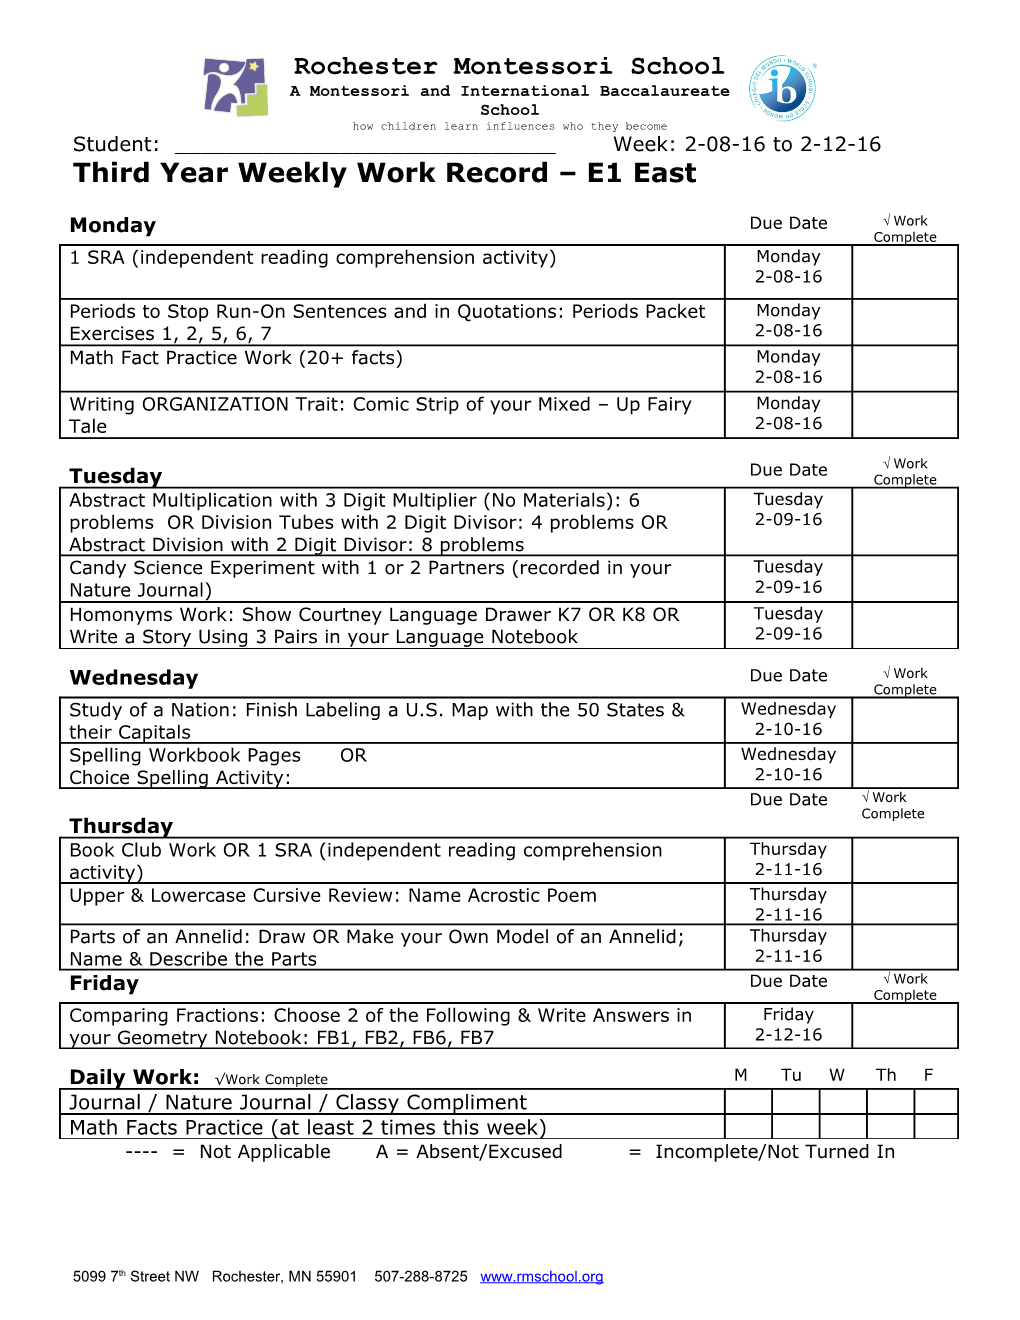 Third Year Weekly Work Record E1 East